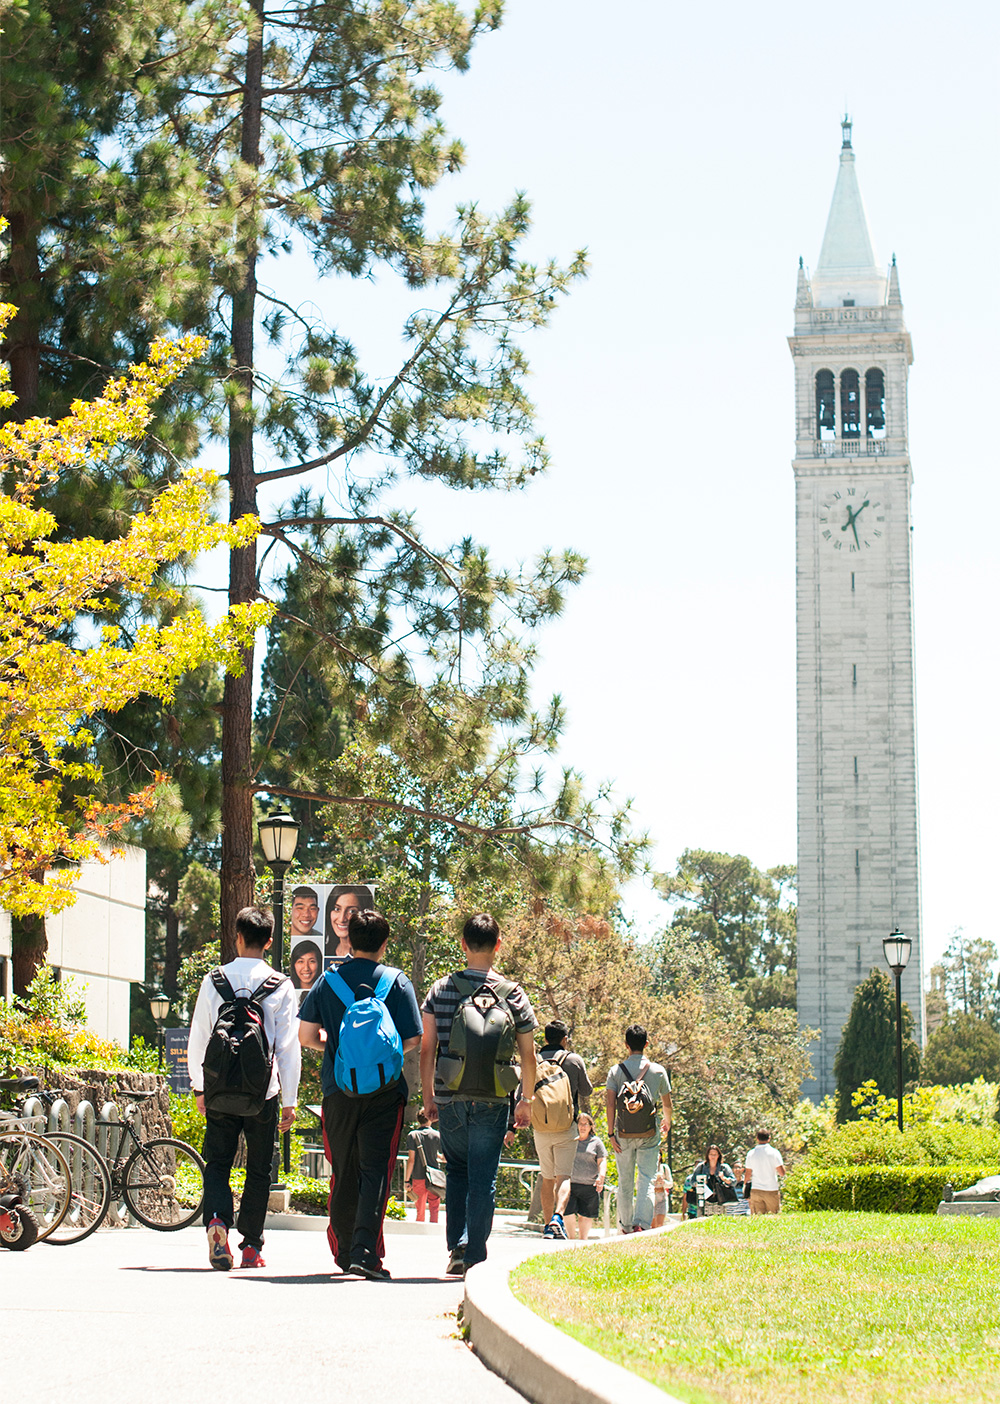 The campanile on the UC Berkeley campus.